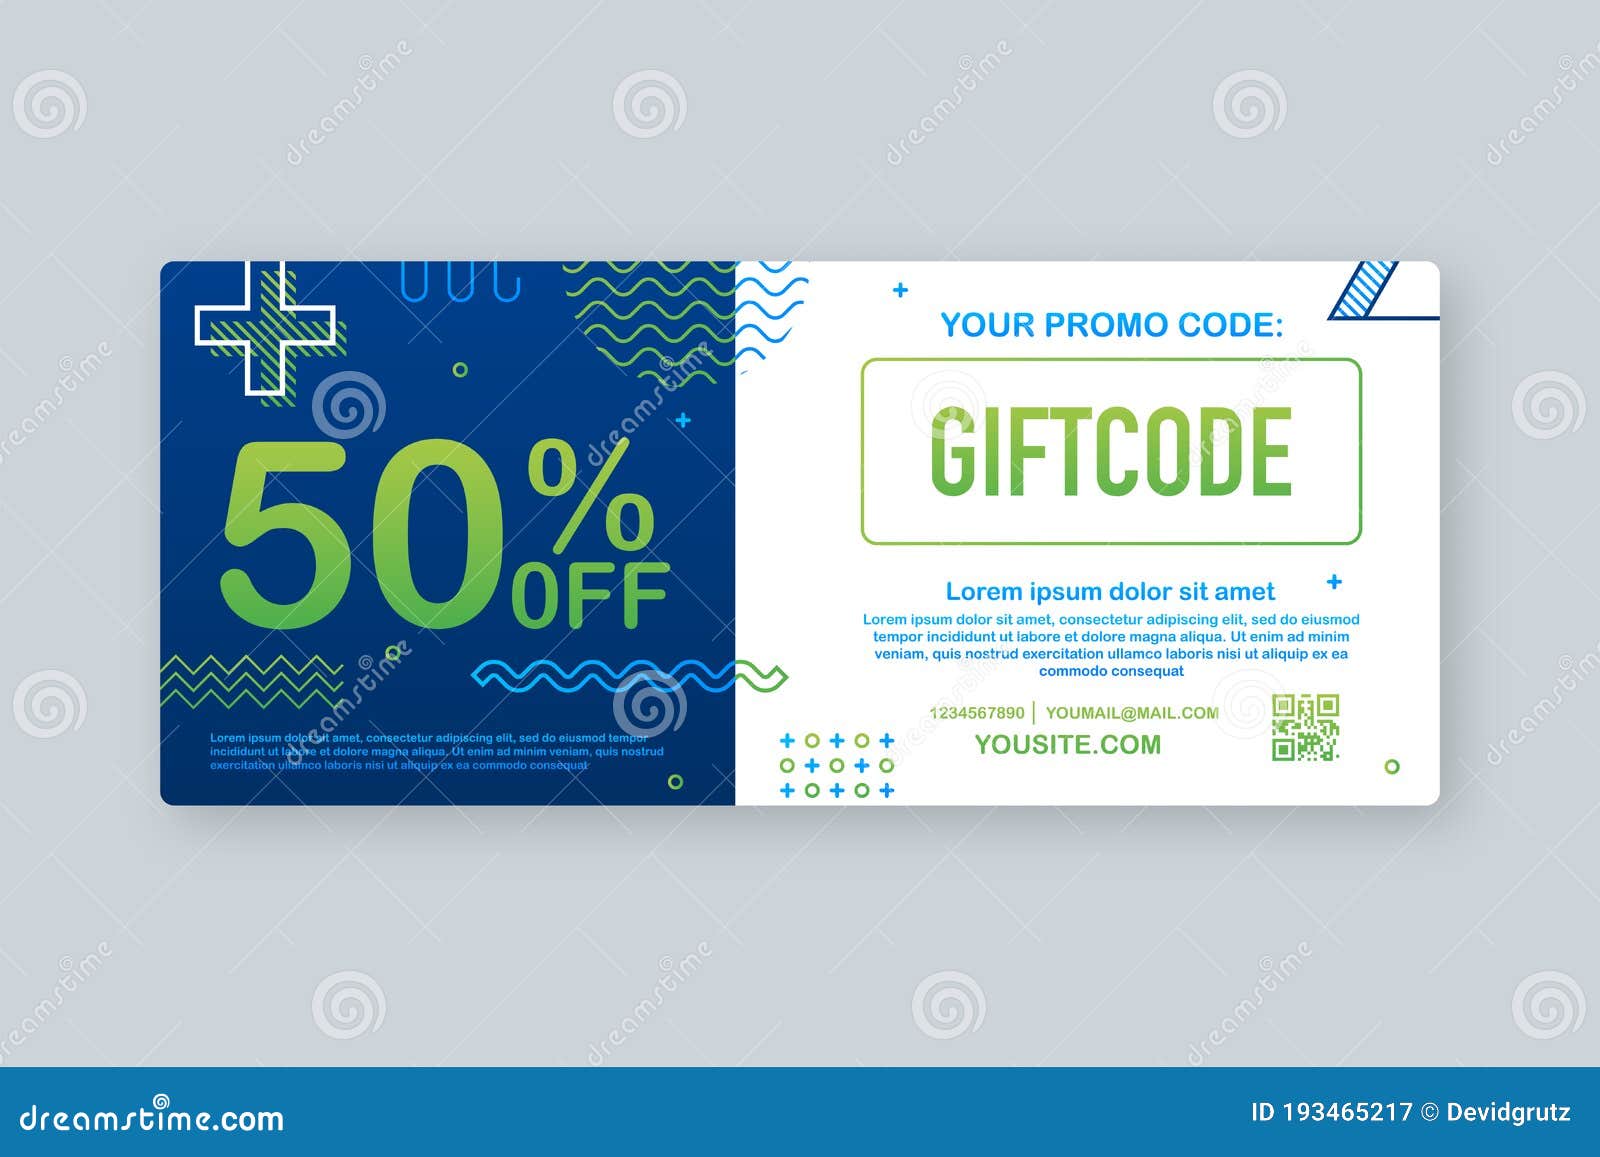 The 5 Best Coupon Websites of 2022